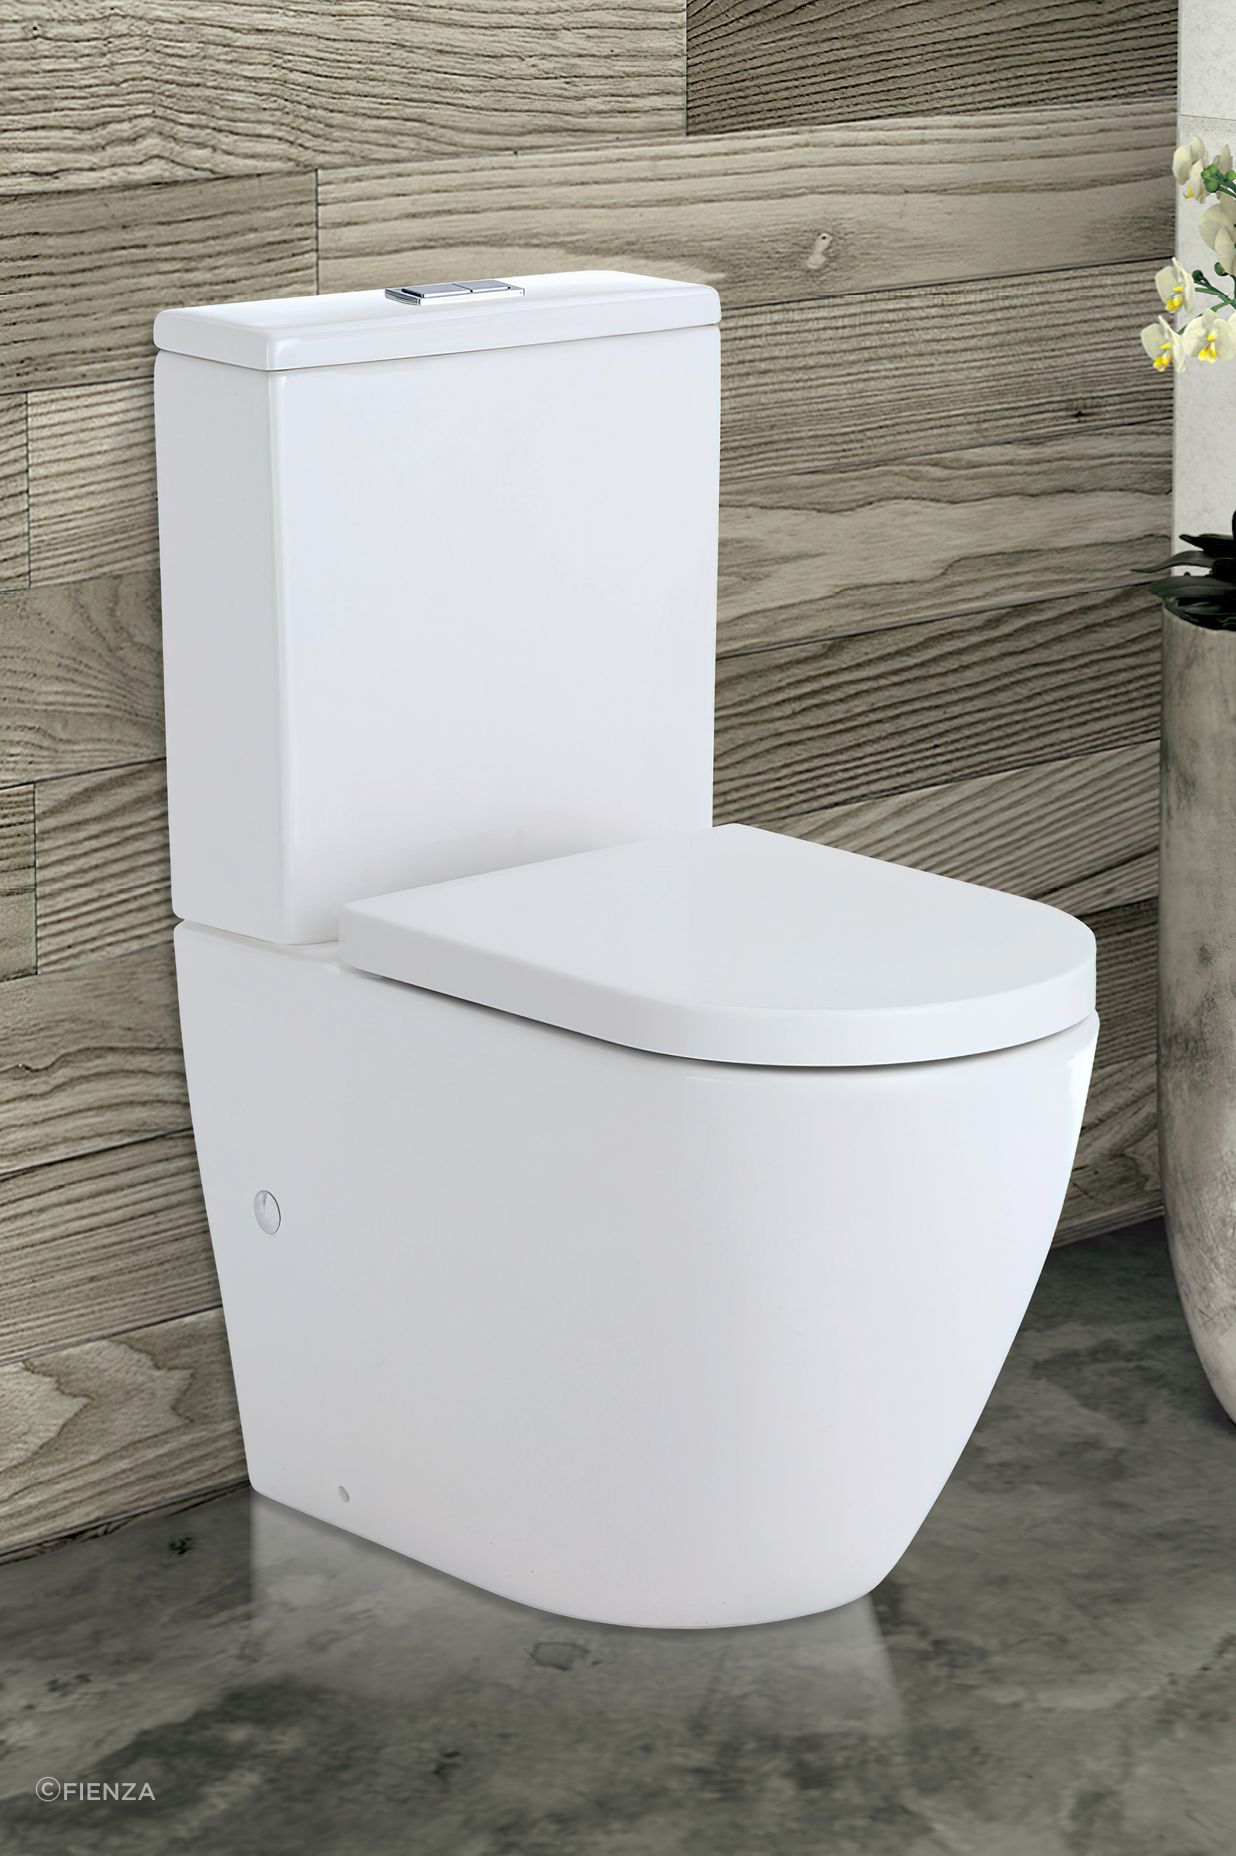 The Koko Back-to-Wall Toilet Suite is available in a range of finishes